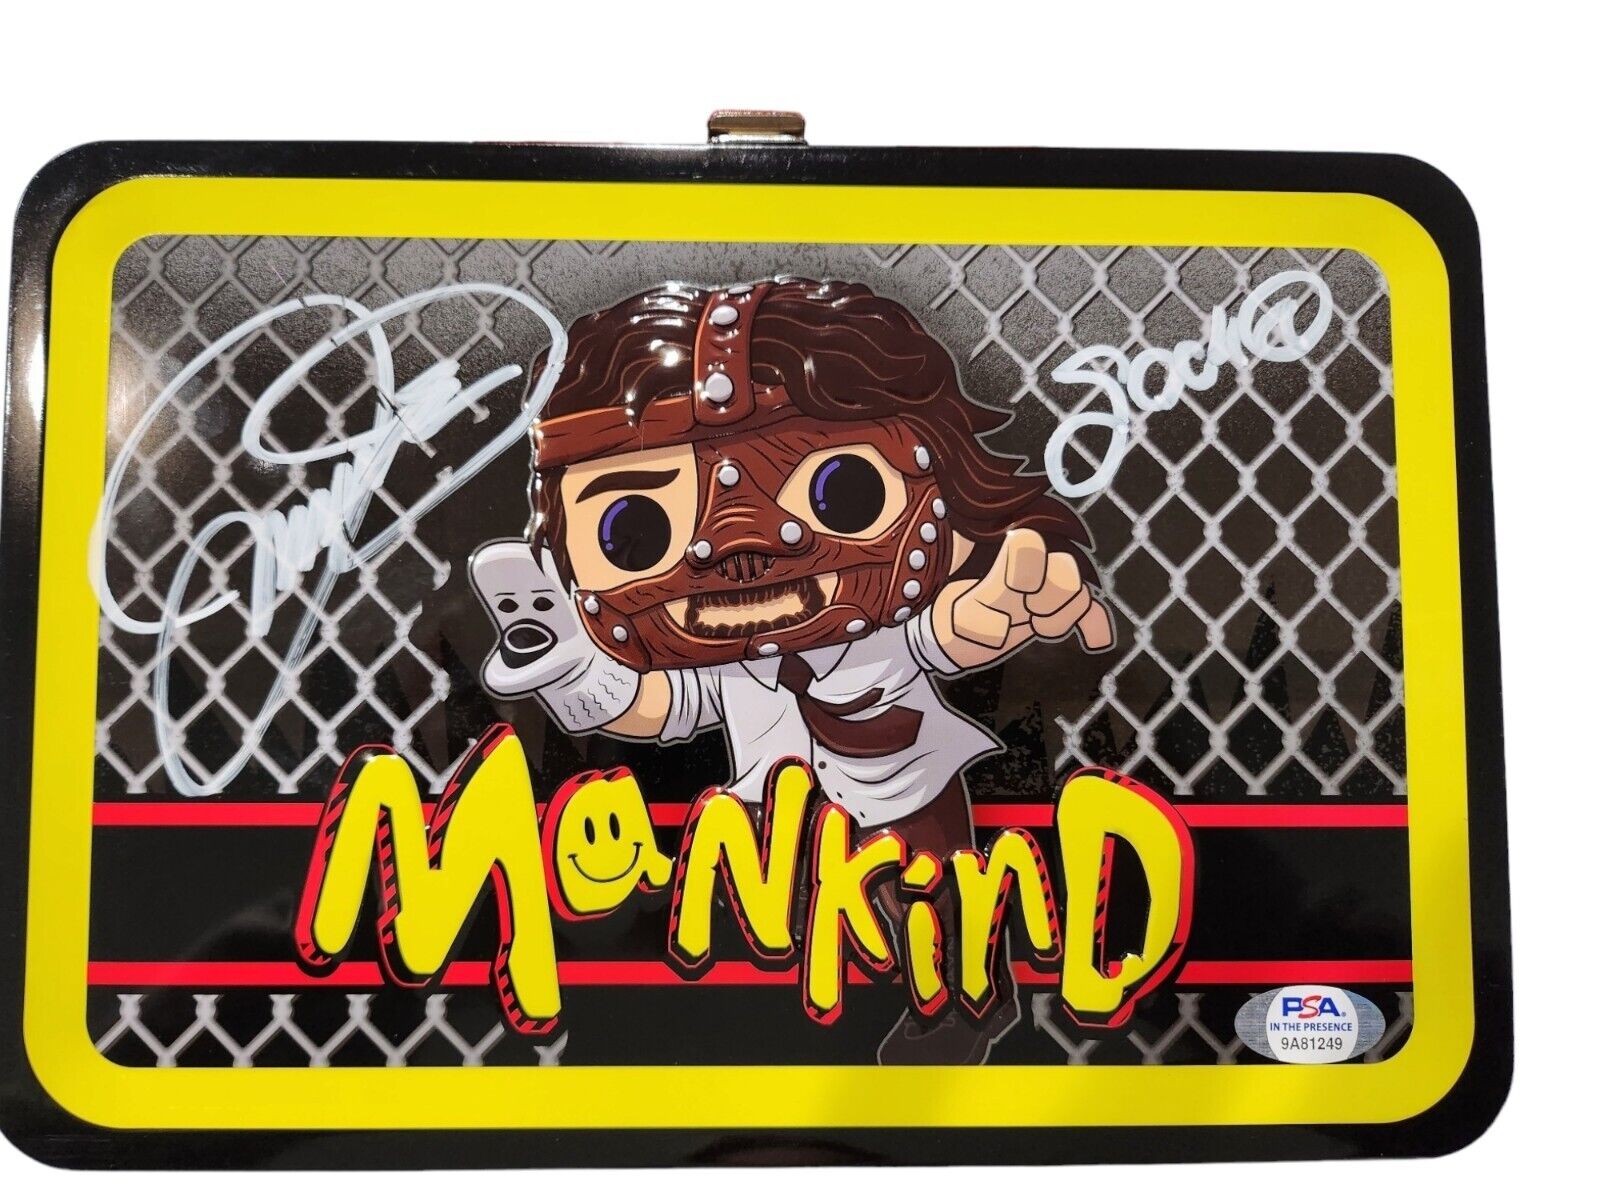 Mankind Tin Lunch Box Singed By Mick Foley Game Stop Exclusive NO FUNKO PSA COA 